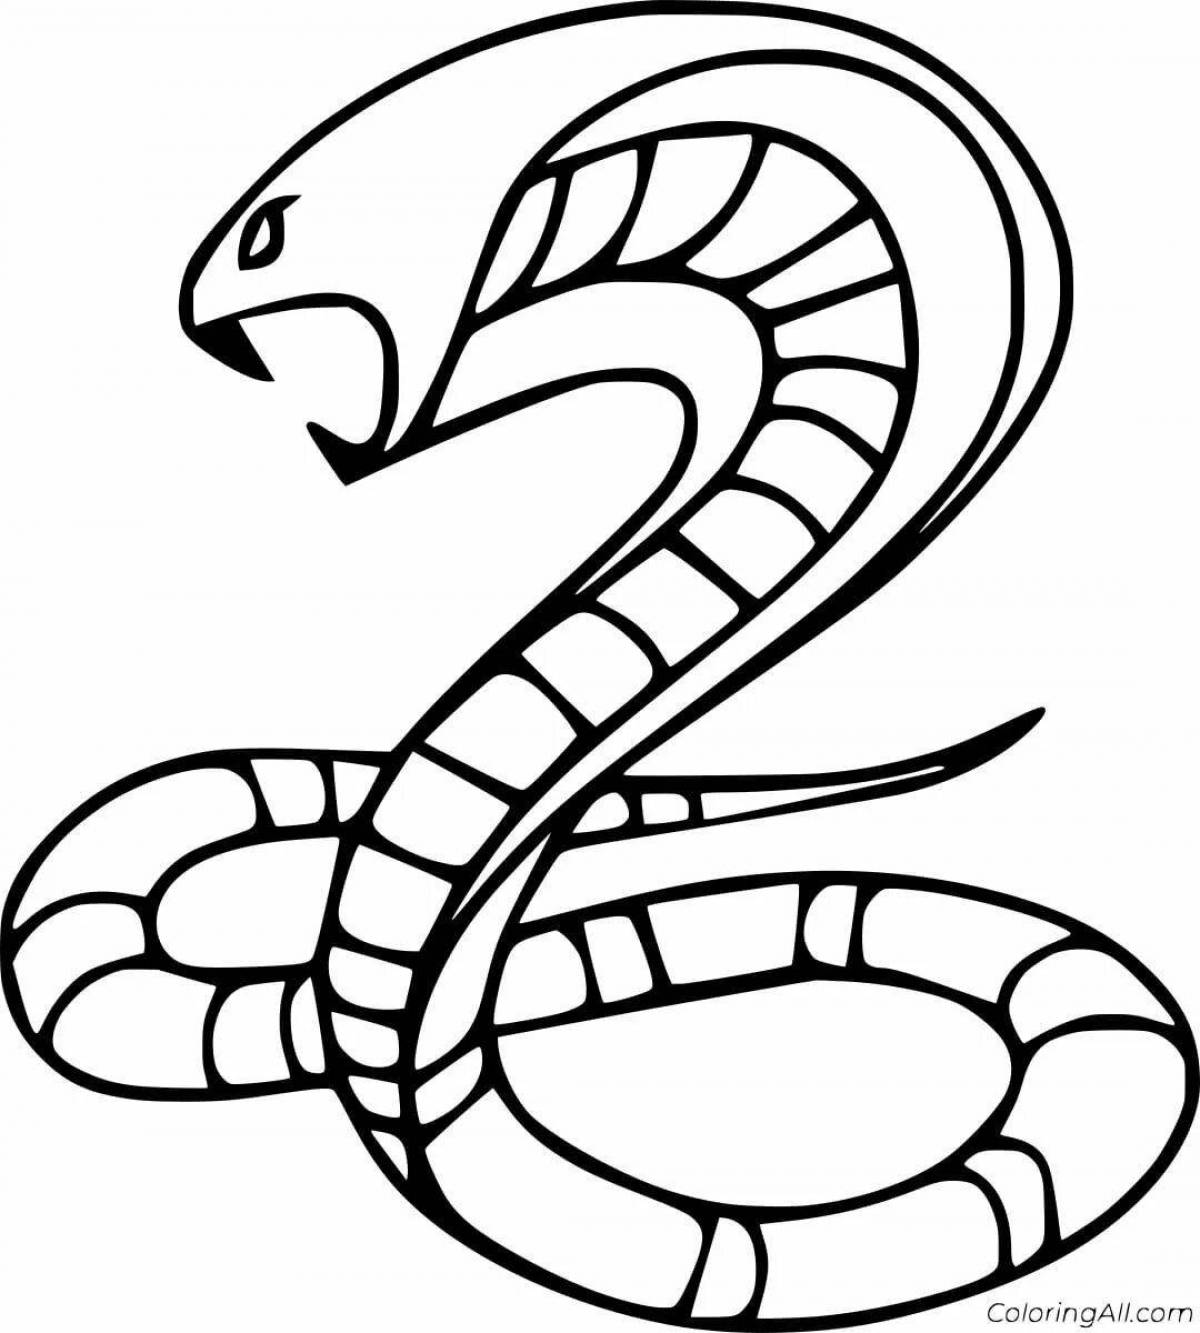 Awesome king cobra coloring page